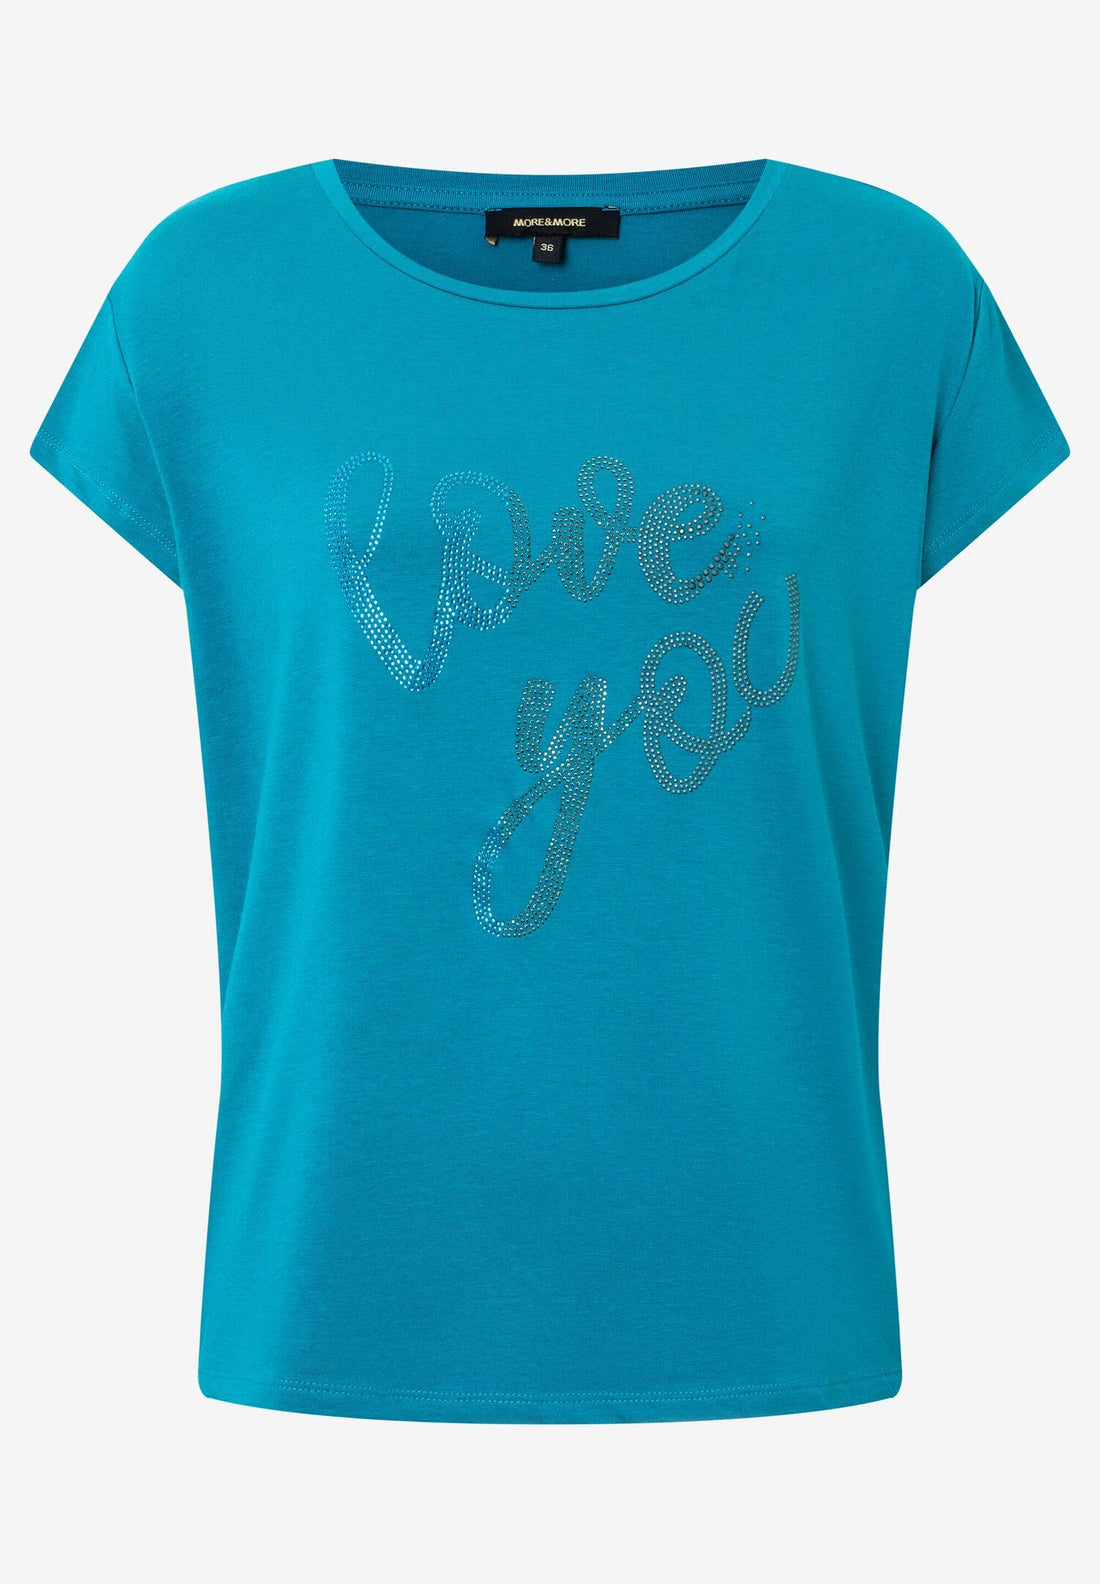 Blue Short Sleeve T-Shirt With Lettering_01